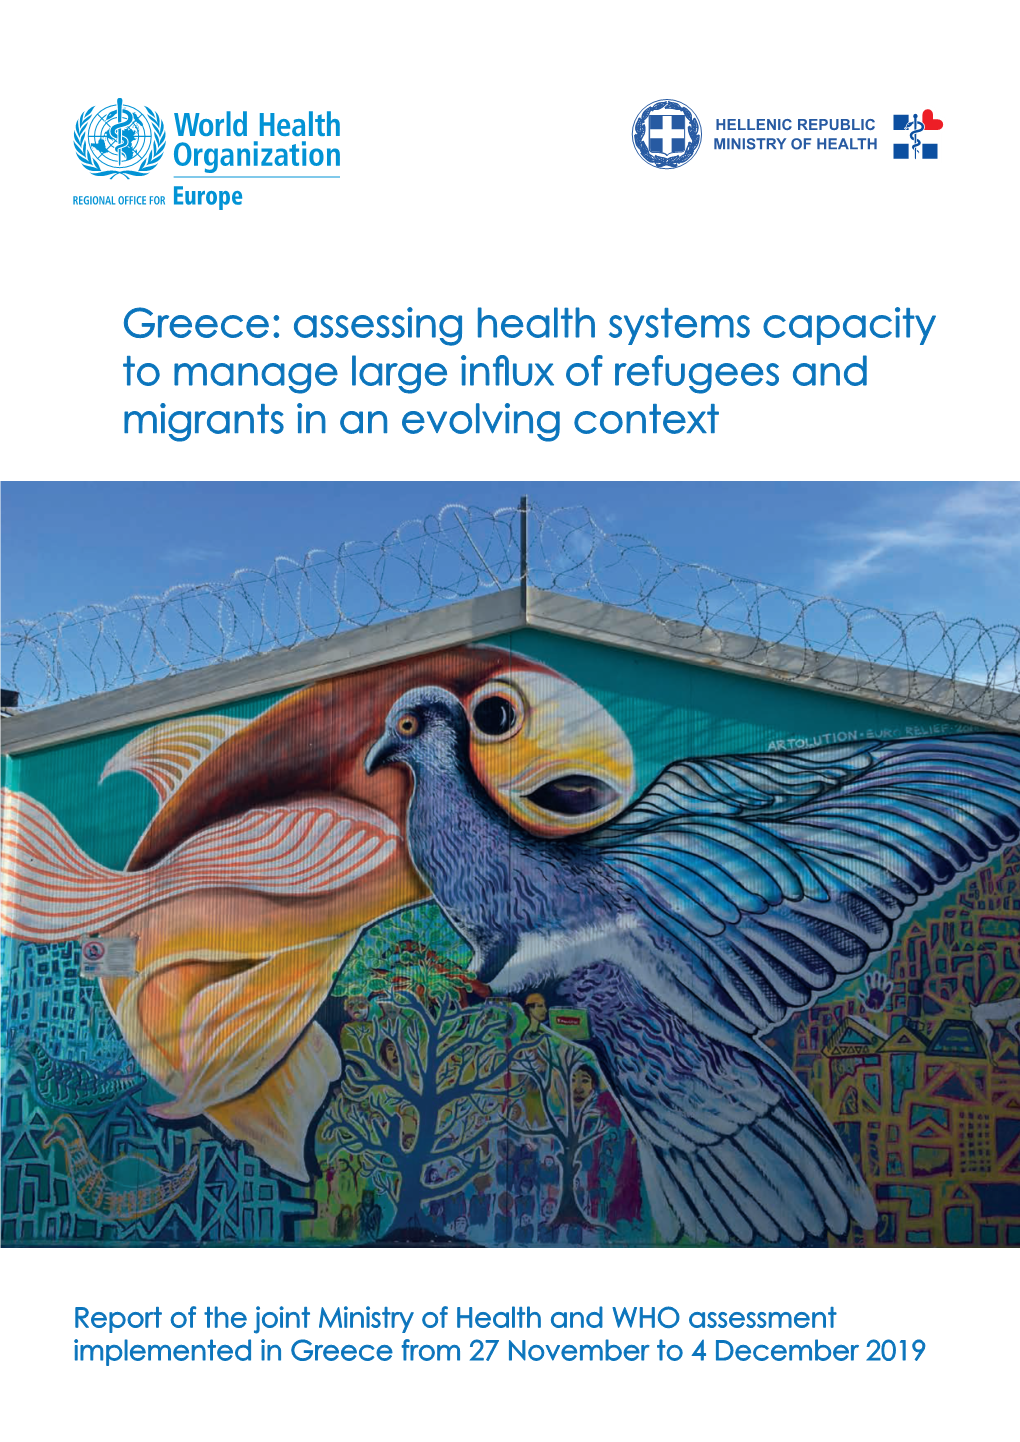 Greece: Assessing Health Systems Capacity to Manage Large Influx of Refugees and Migrants in an Evolving Context